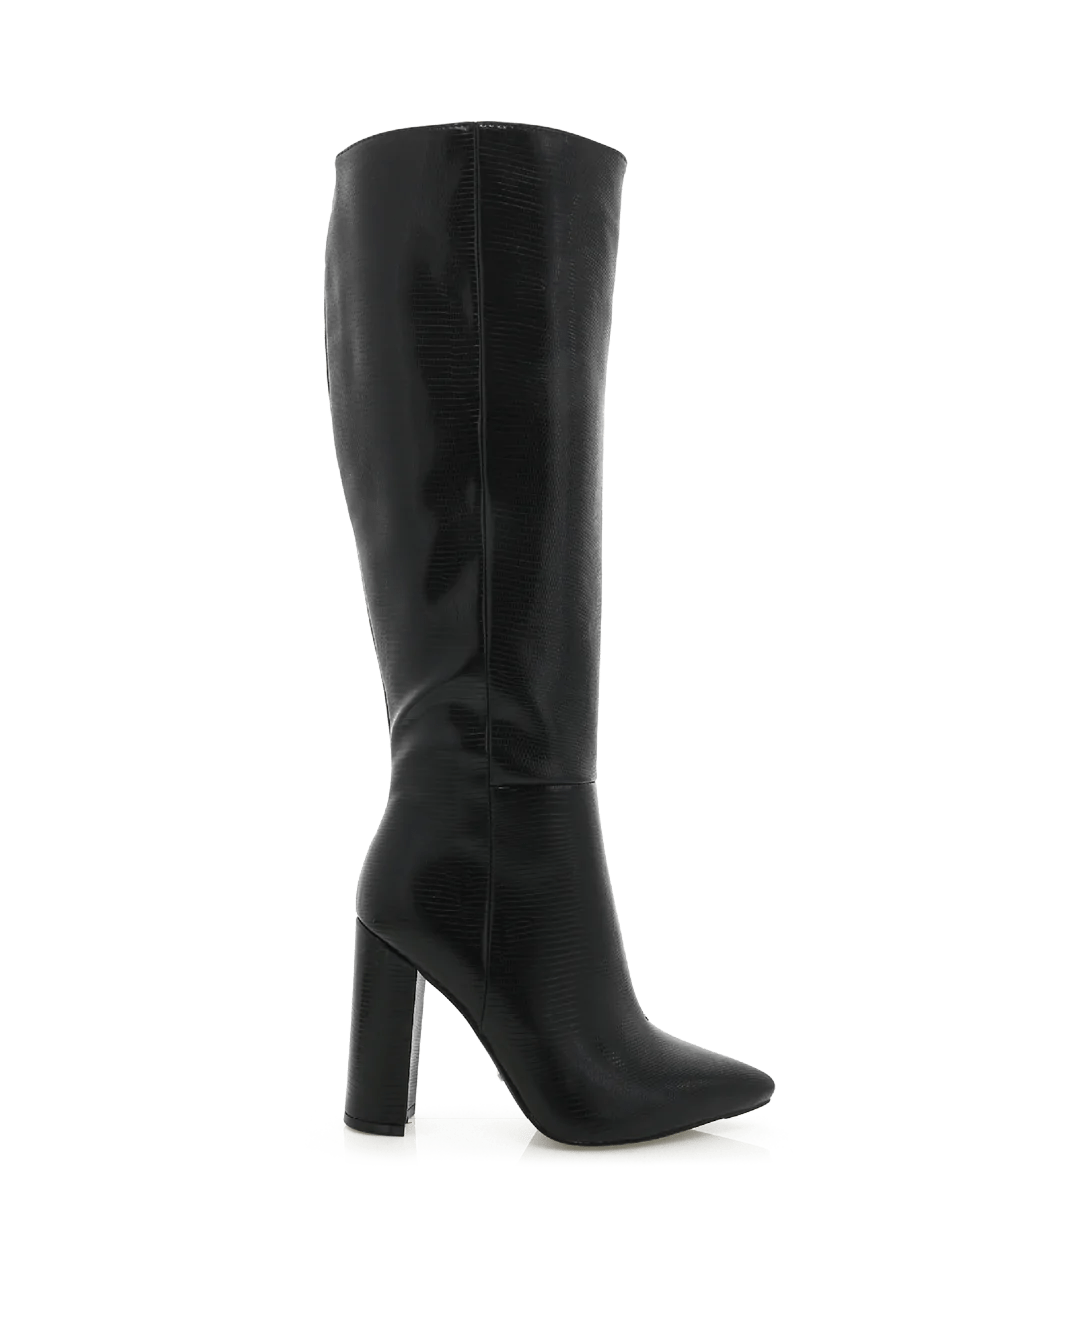 Milla Snake Knee High Boot Black, Shoes by Billini Shoes | LIT Boutique